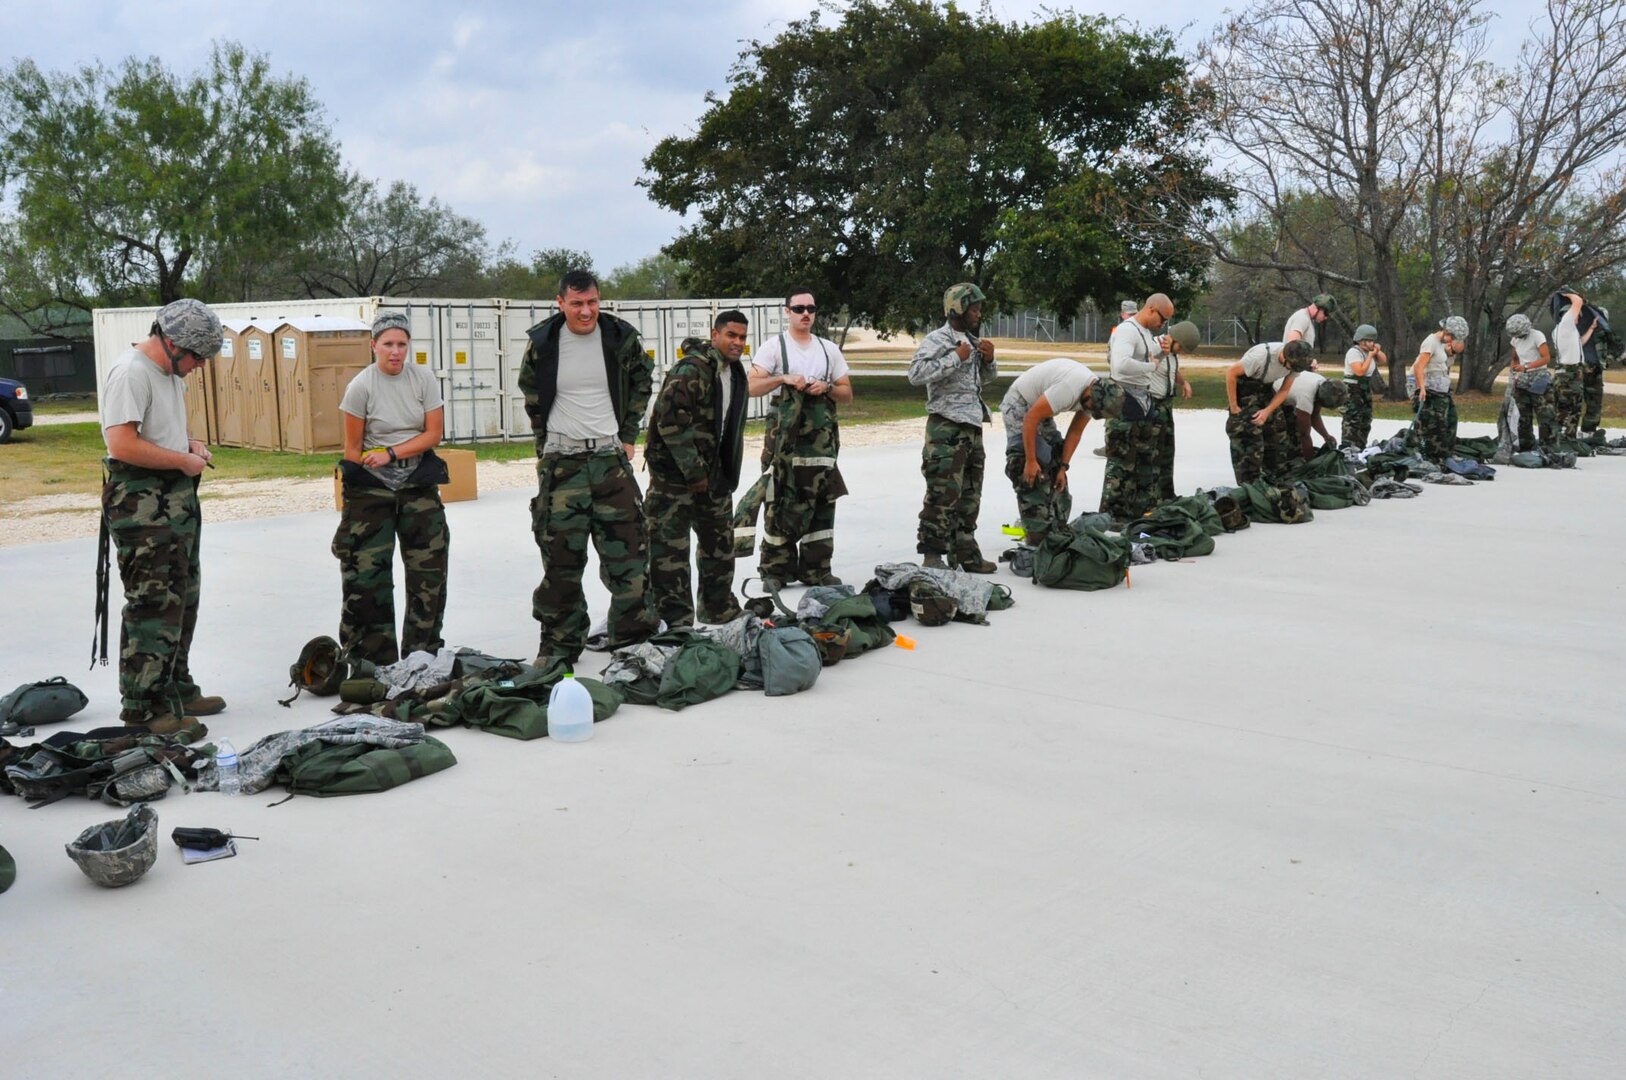 Airmen of the 433rd Airlift Wing don their Mission Oriented Protective Posture gear just before the Steel Thunder exercise Nov. 5, 2016 at Joint Base San Antonio-Lackland. The exercise is designed to test the unit’s responsiveness to a Chemical, Biological, Radiological, Nuclear and high-yield Explosives attack. (U.S. Air Force photo/Senior Airman Bryan Swink)